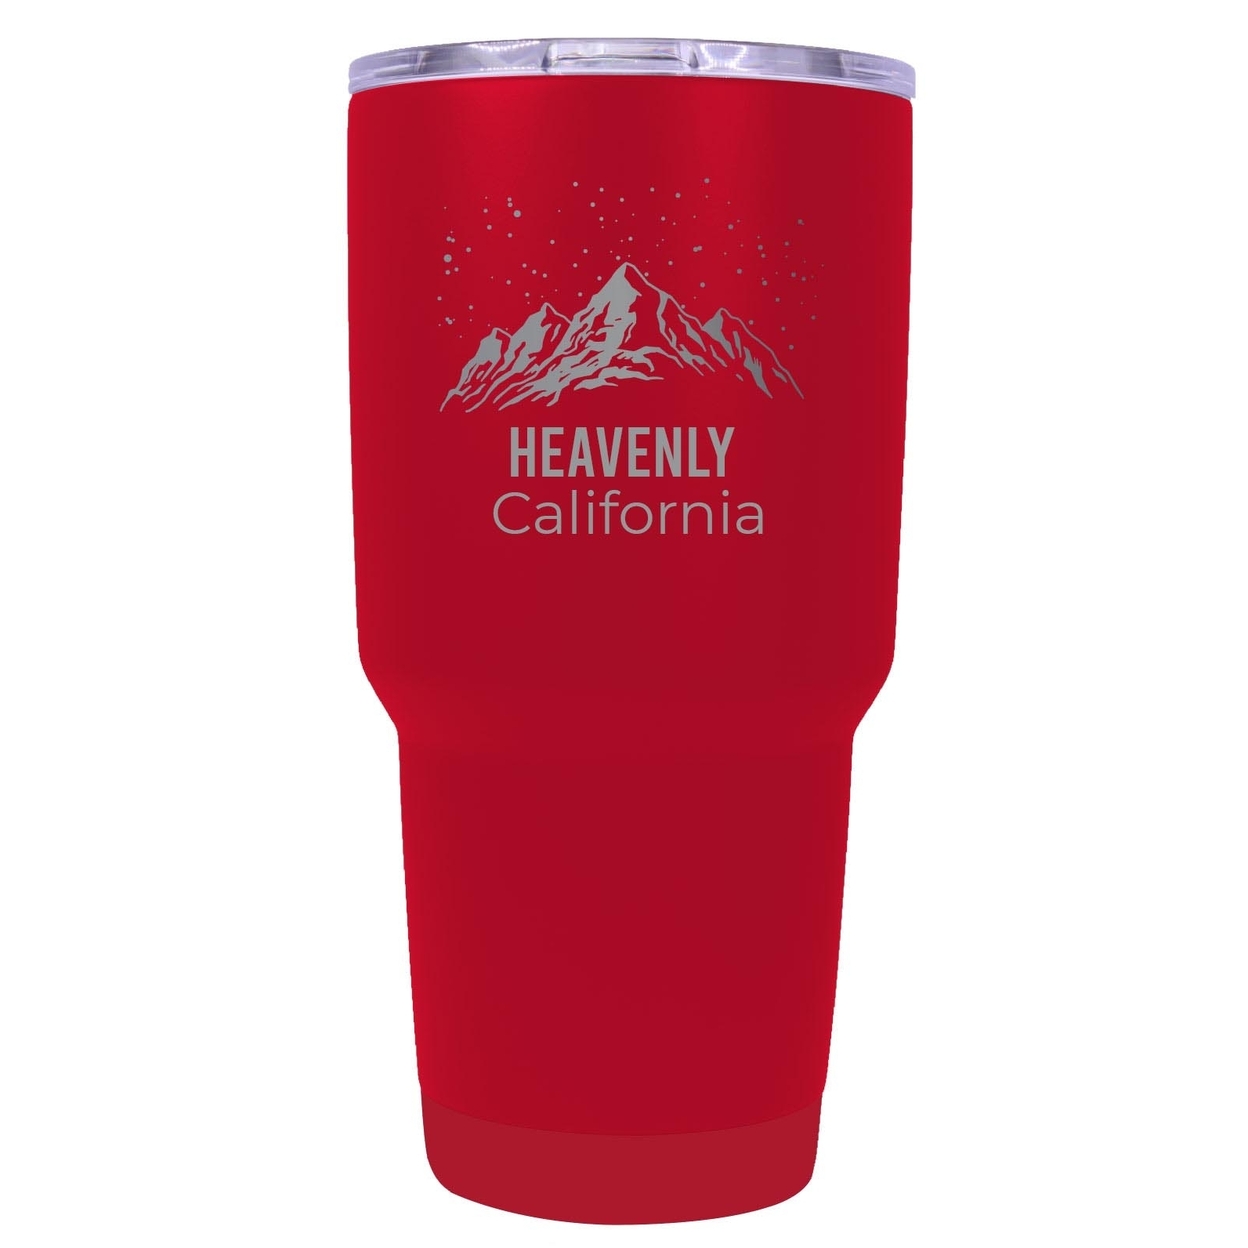 Winter Park Colorado Ski Snowboard Winter Souvenir Laser Engraved 24 Oz Insulated Stainless Steel Tumbler - Red